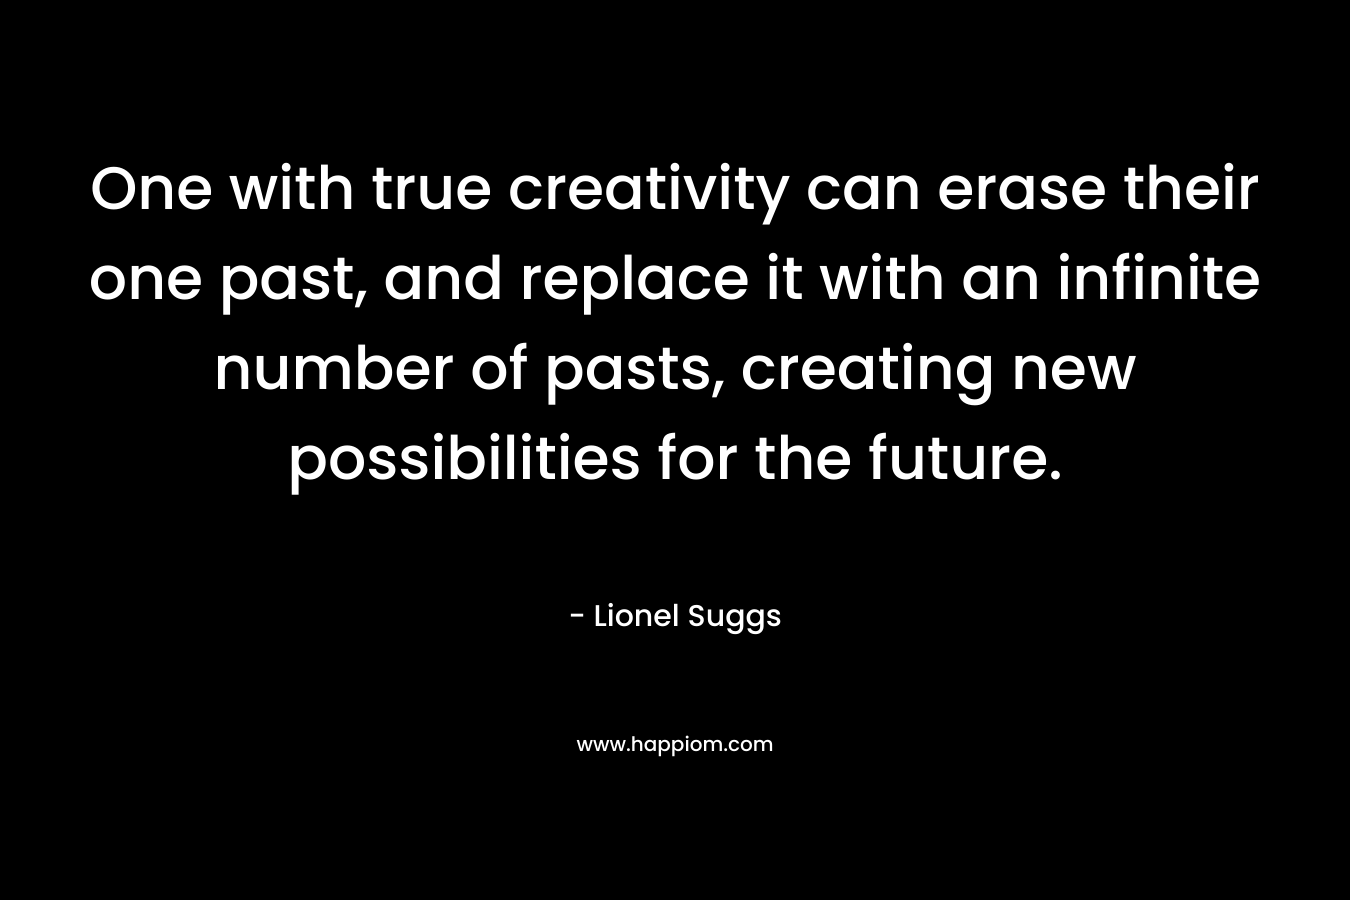 One with true creativity can erase their one past, and replace it with an infinite number of pasts, creating new possibilities for the future. – Lionel Suggs